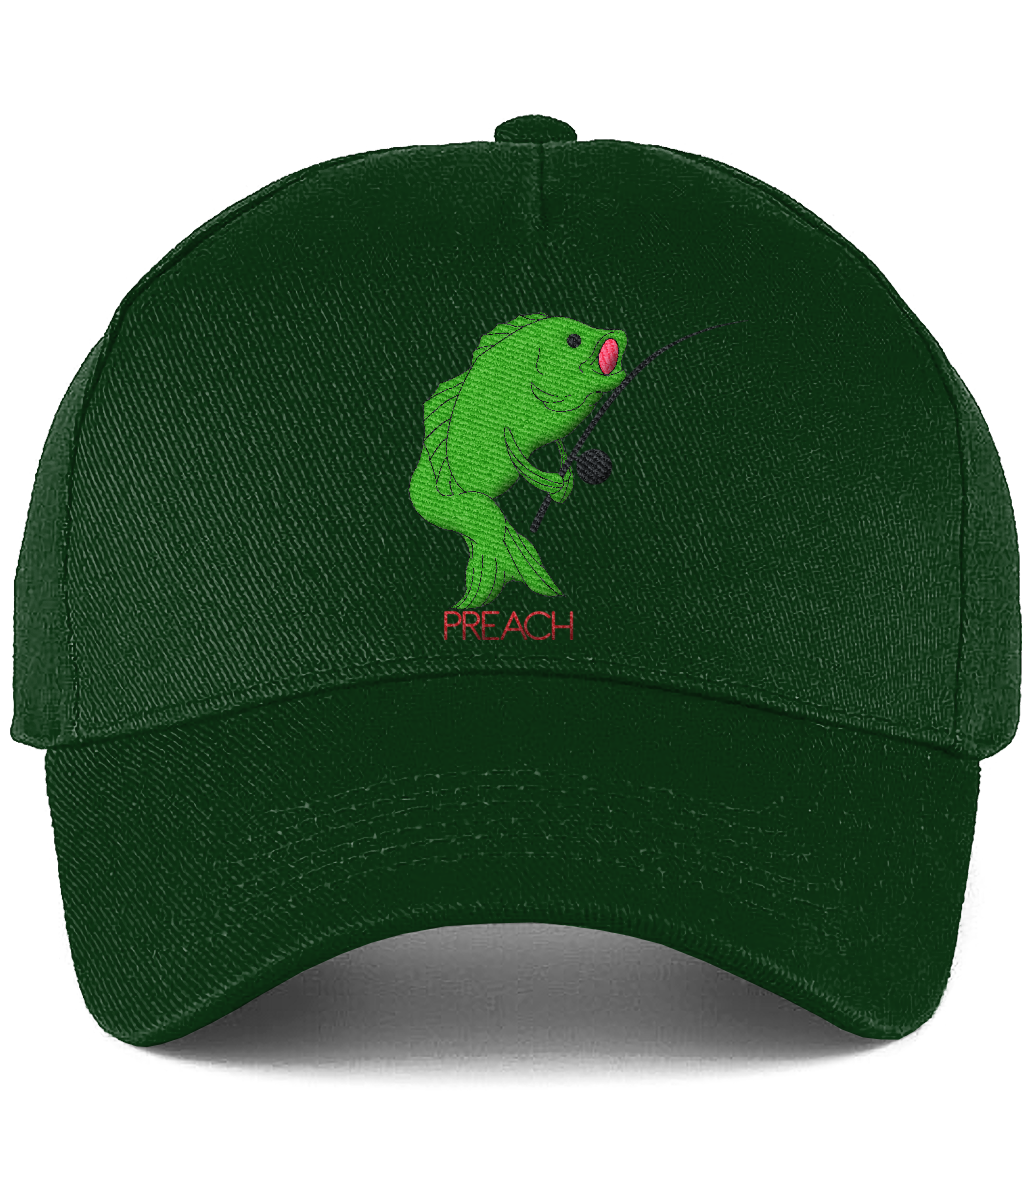 Bass Fish Brushed Twill Cap Embroidered Hats - MORILLO ENTERPRISE 